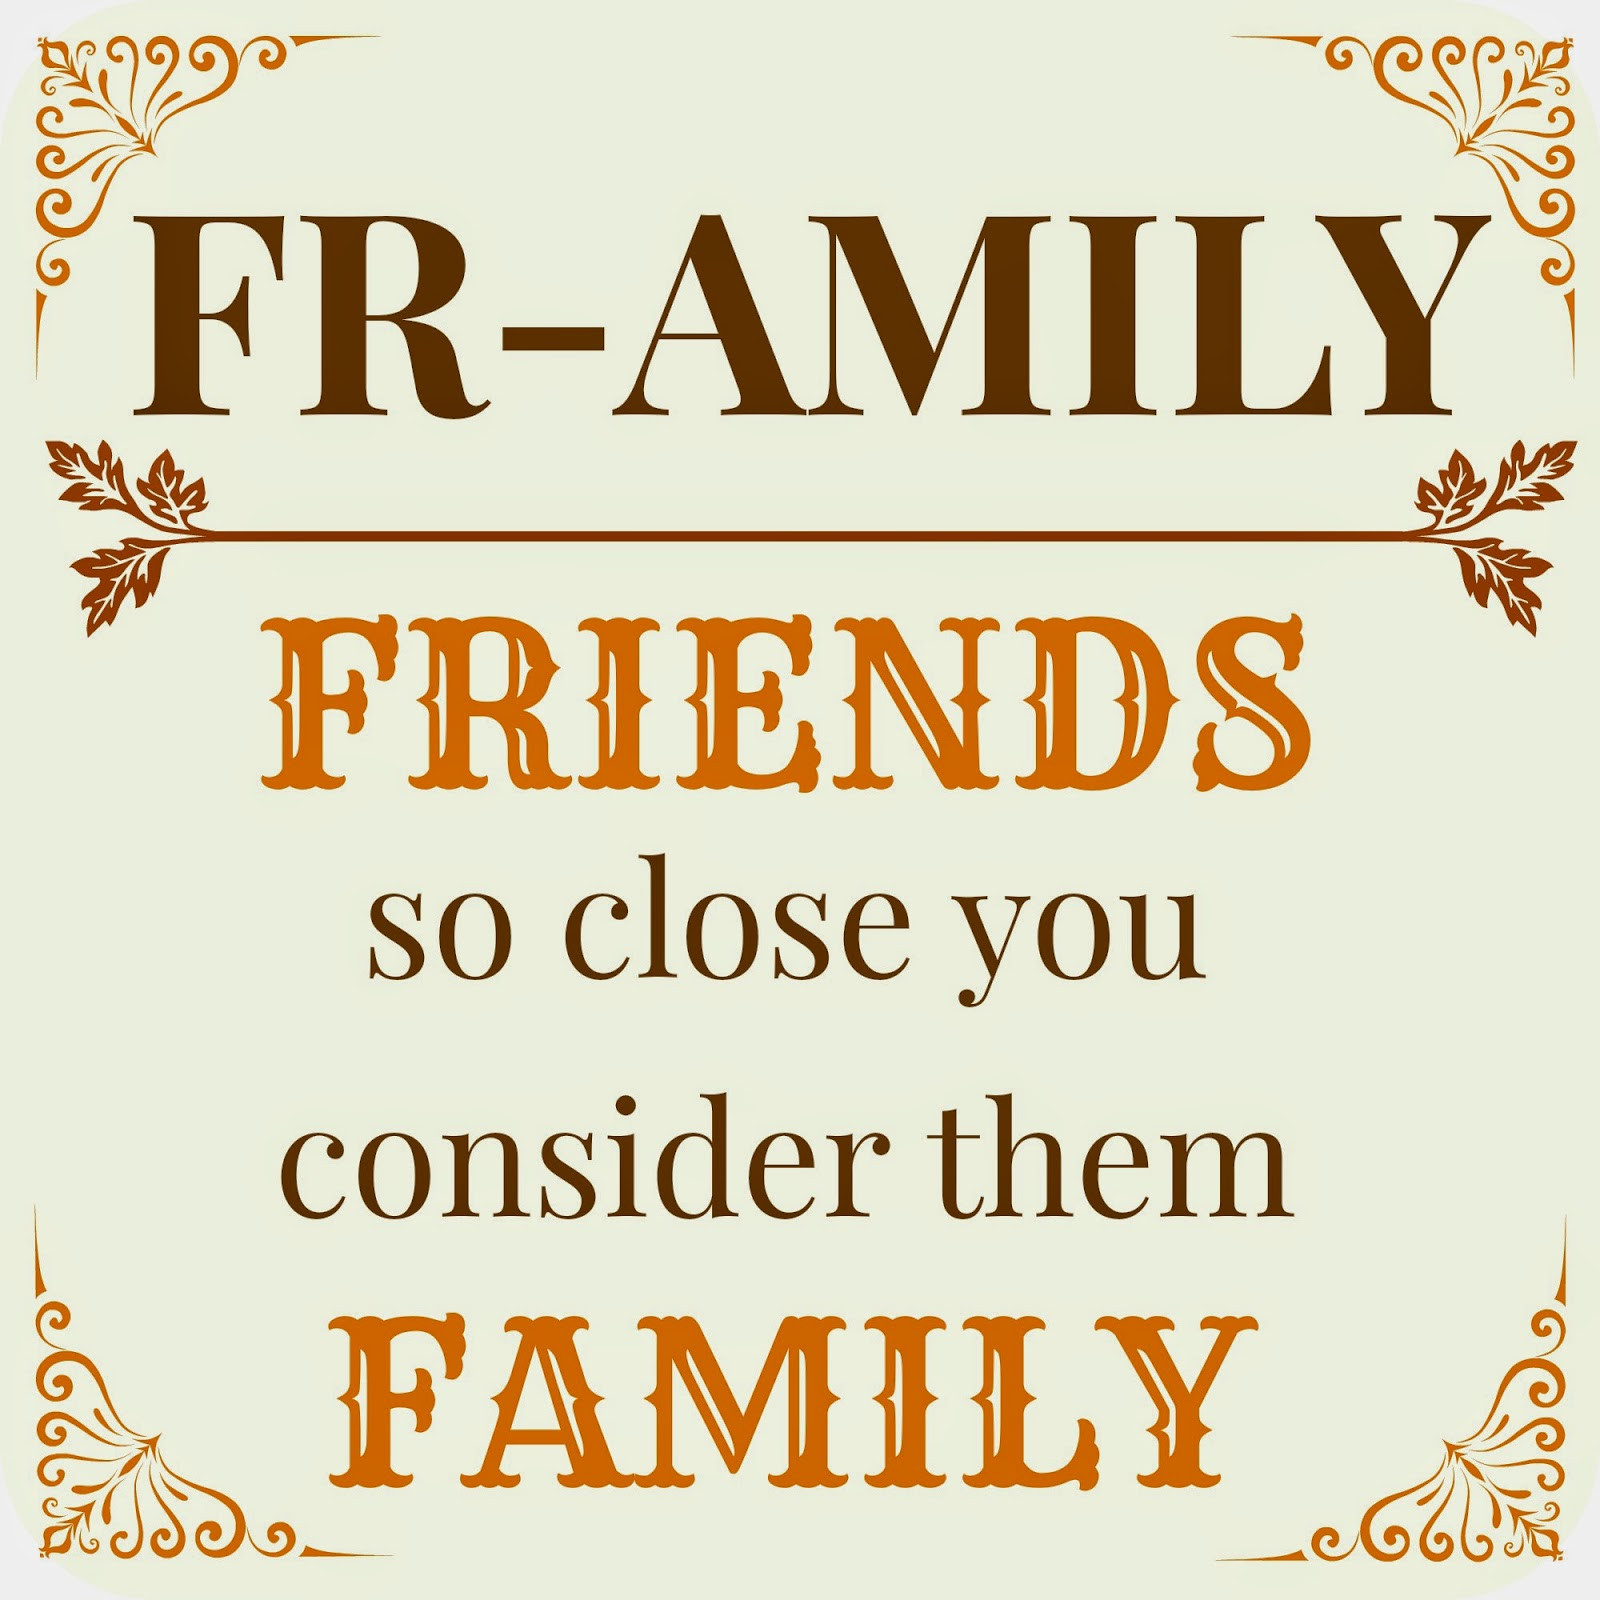 Friends Being Family Quotes
 Quotes About Friends Considered Family QuotesGram